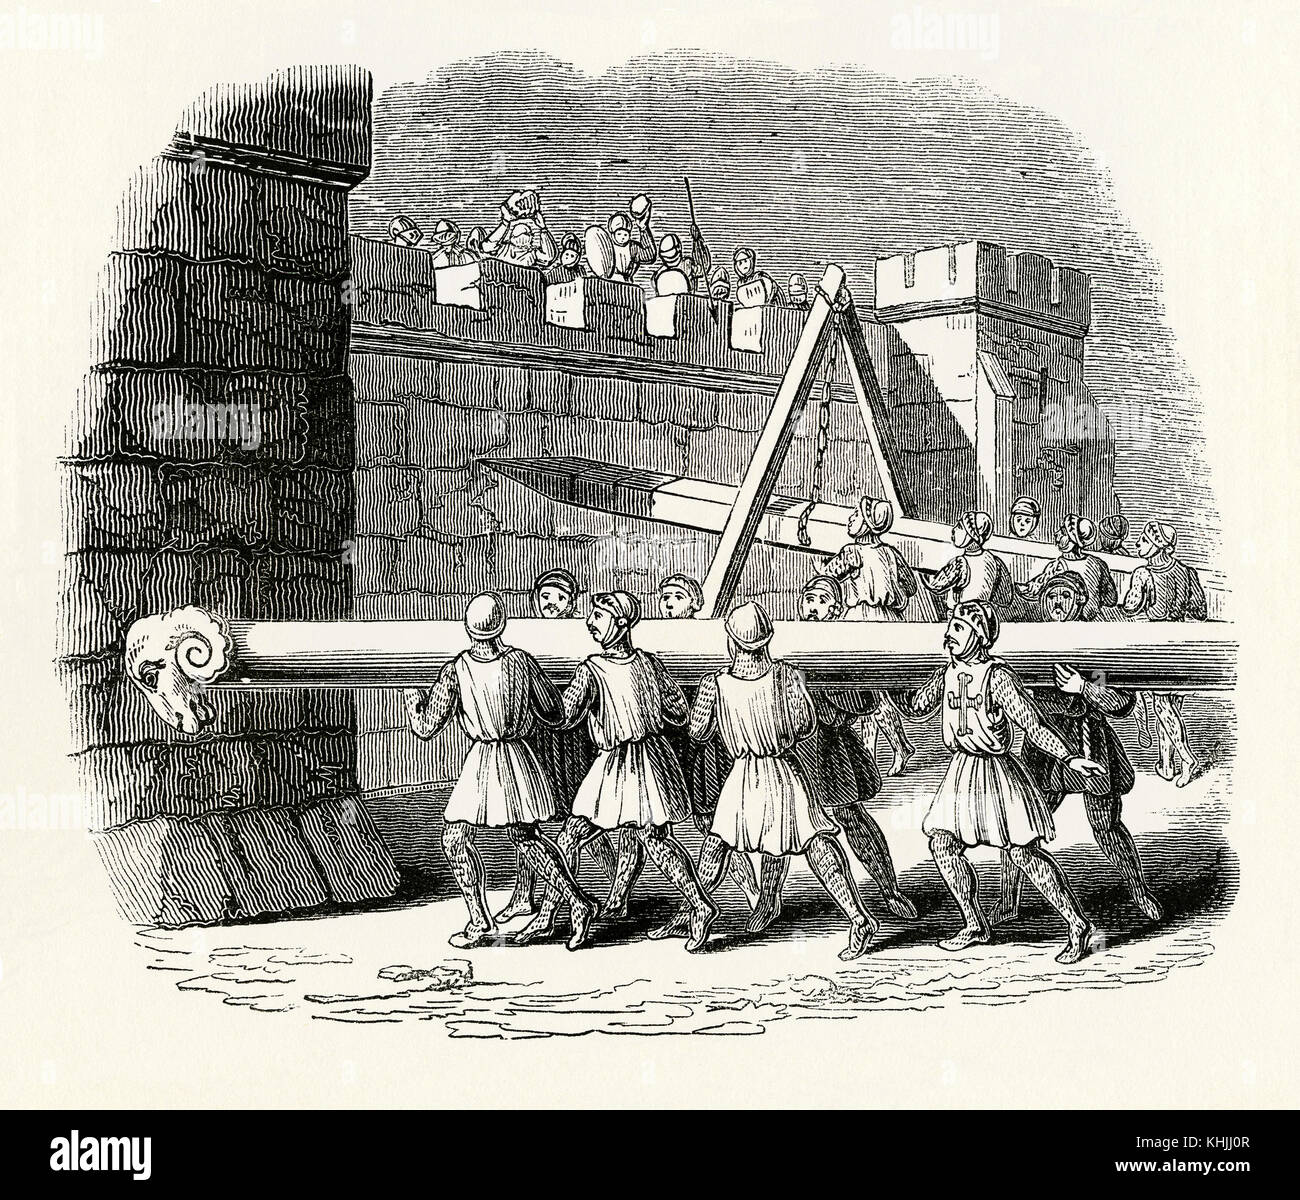 An old engraving depicting battle scene in Medieval times - it shows  machines or devices used when attacking castle walls - here battering rams.  One of the battering rams has a pointed